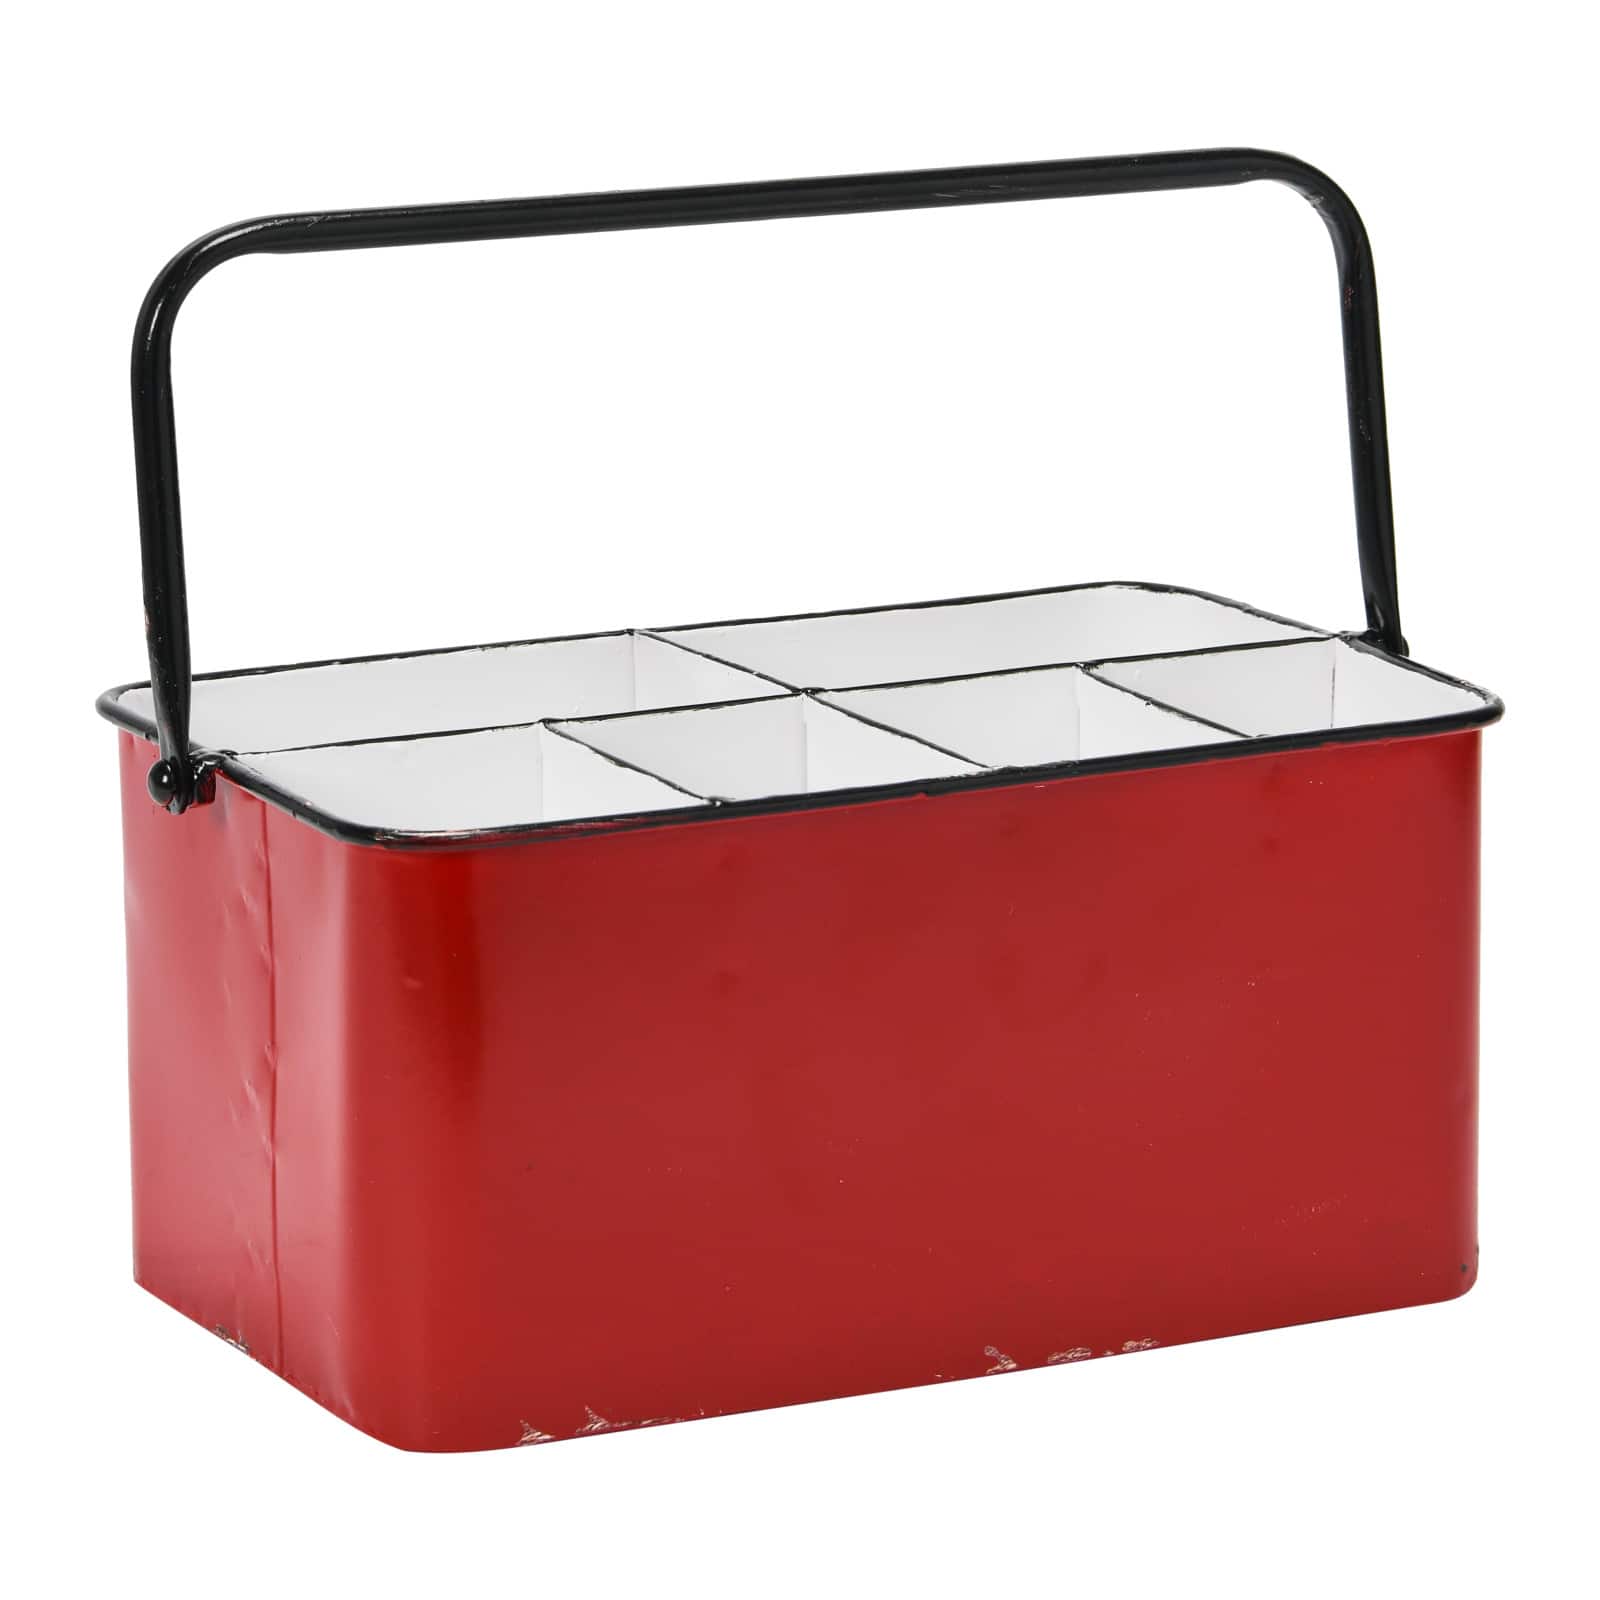 6-Compartment Metal Caddy with Handle